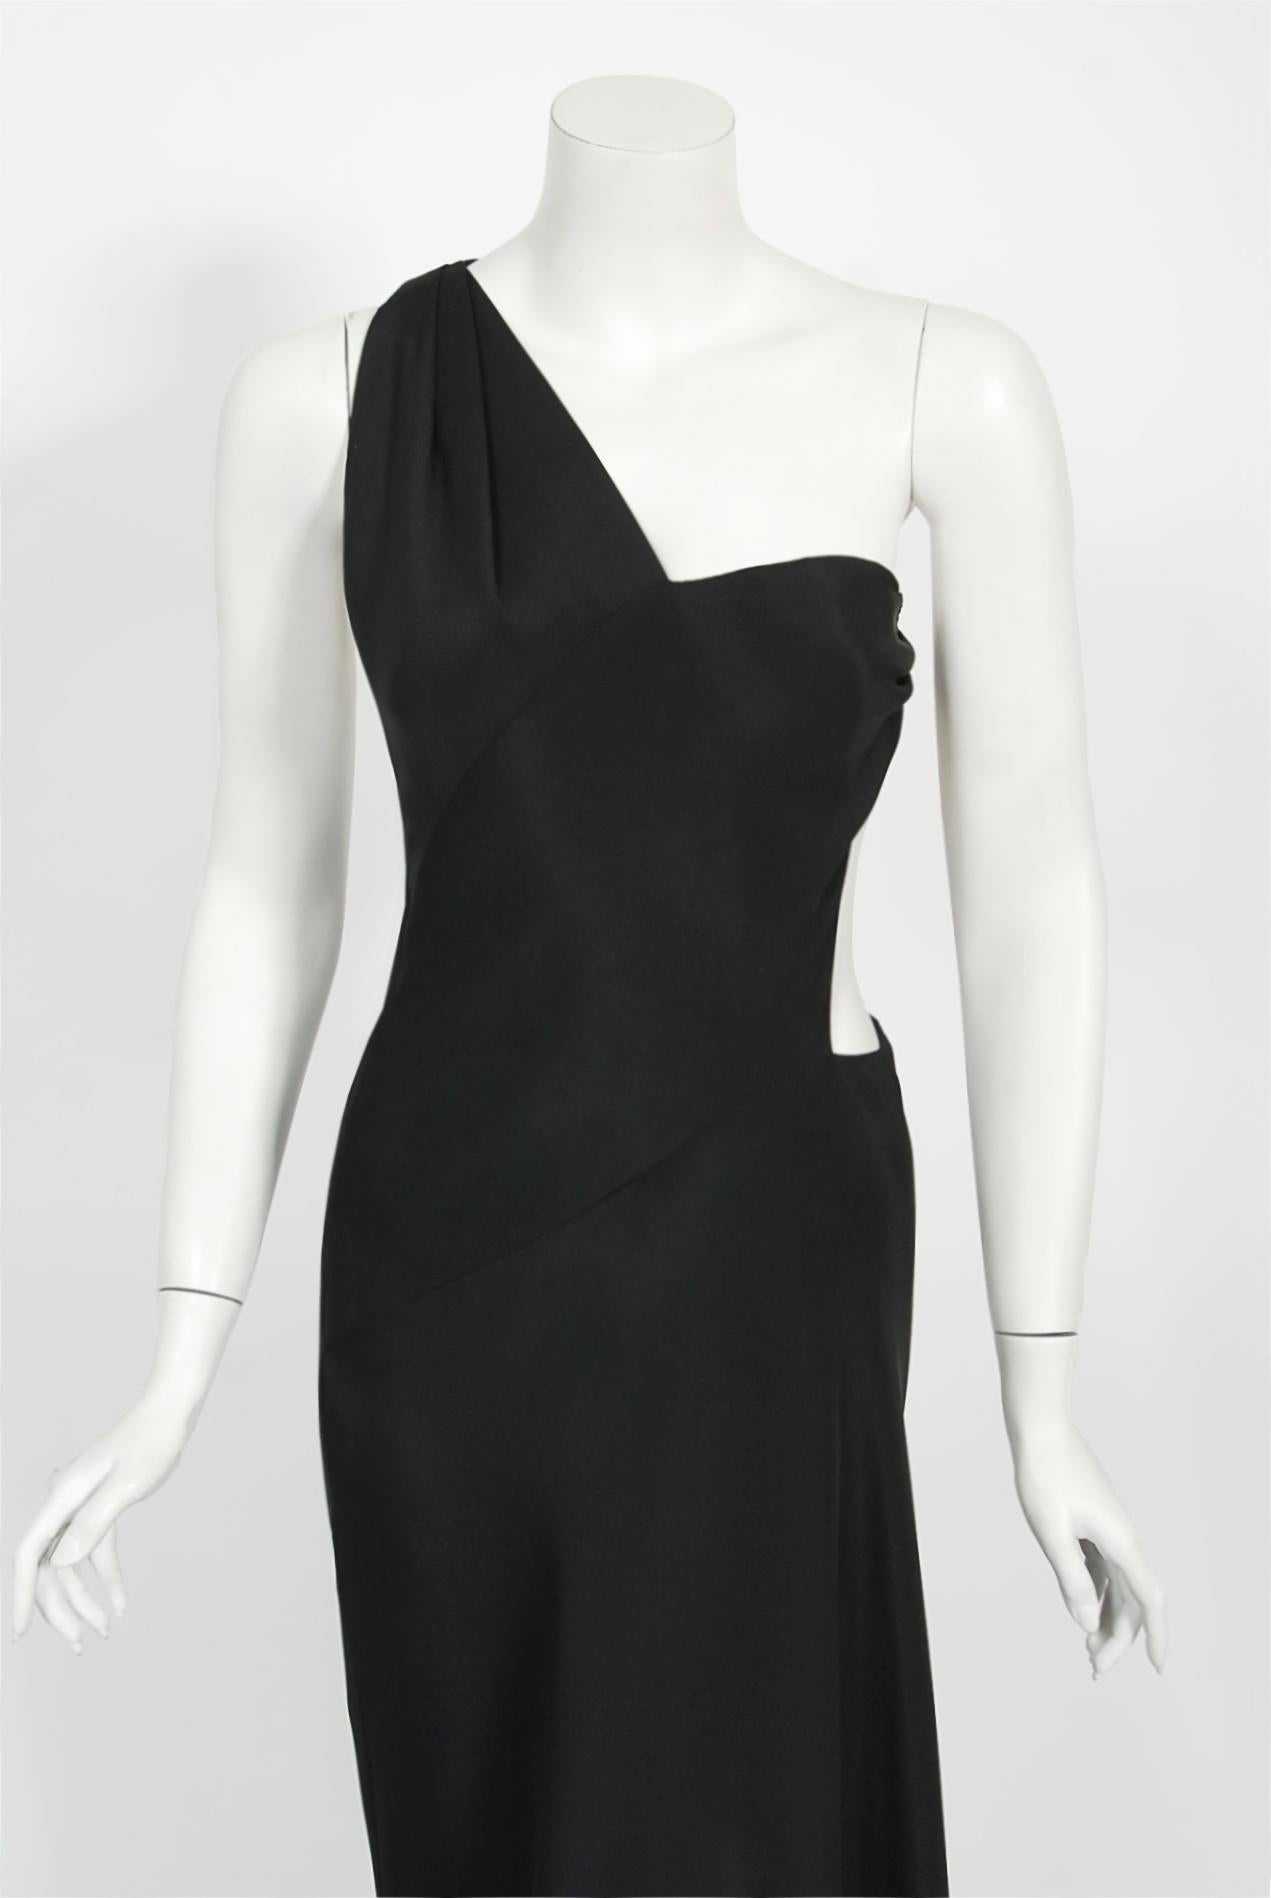 Vintage 1994 Philippe Venet Couture Black Silk Asymmetric Cut Out Bias-Cut Gown In Good Condition For Sale In Beverly Hills, CA